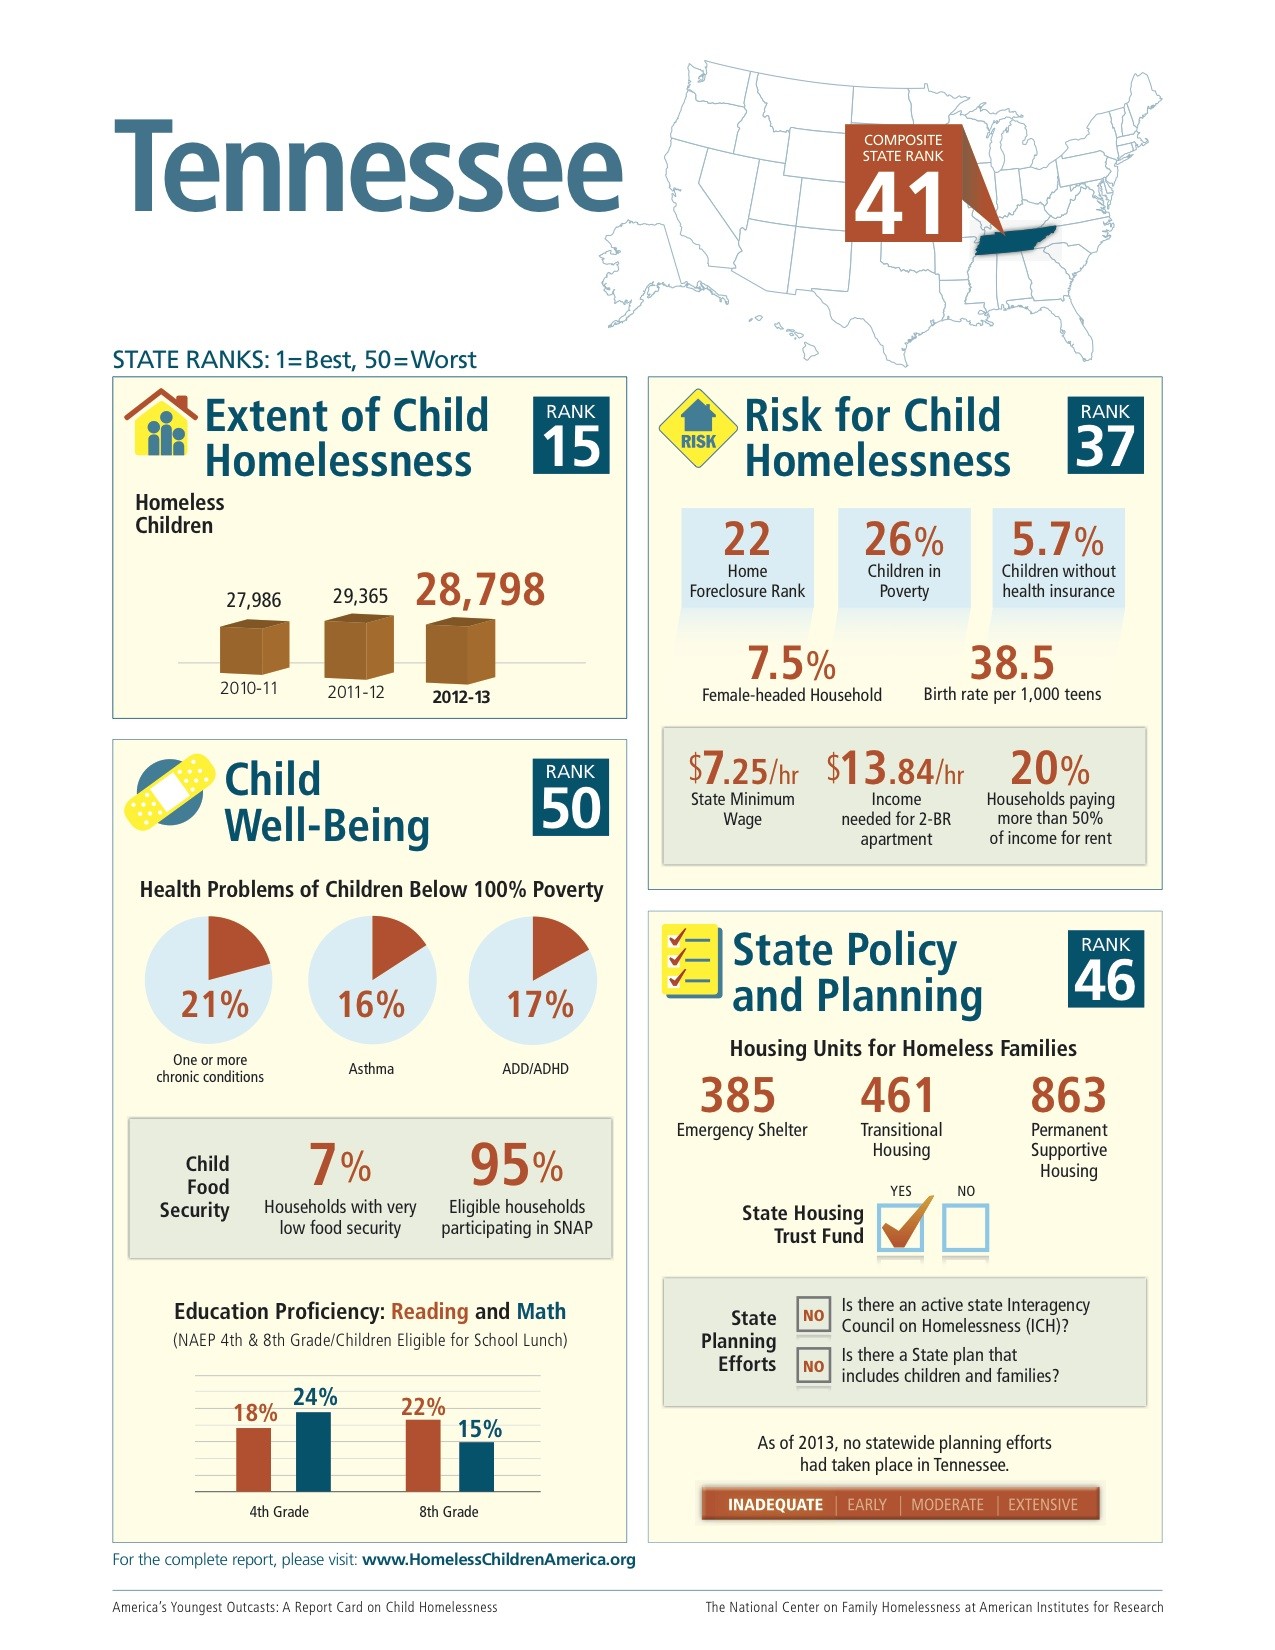 Memphis Flyer Tennessee Among States Most Impacted By Child Homelessness